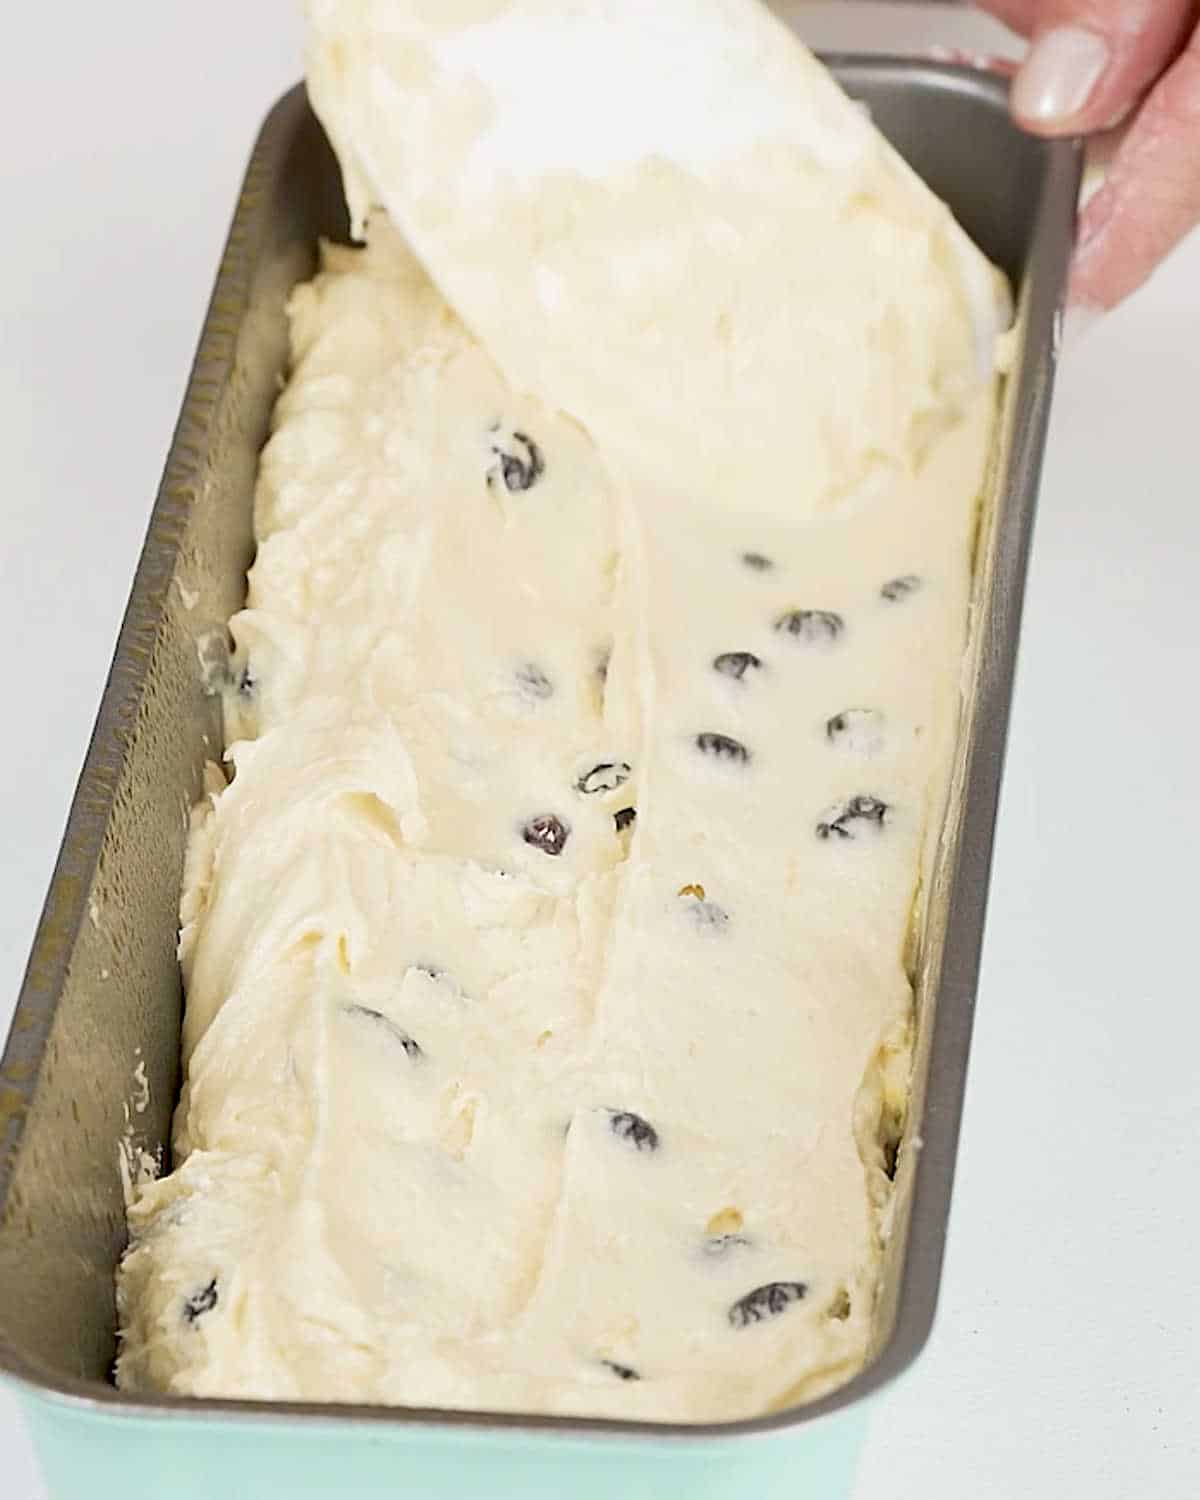 Smoothing blueberry cake batter in a loaf pan with a white spatula.